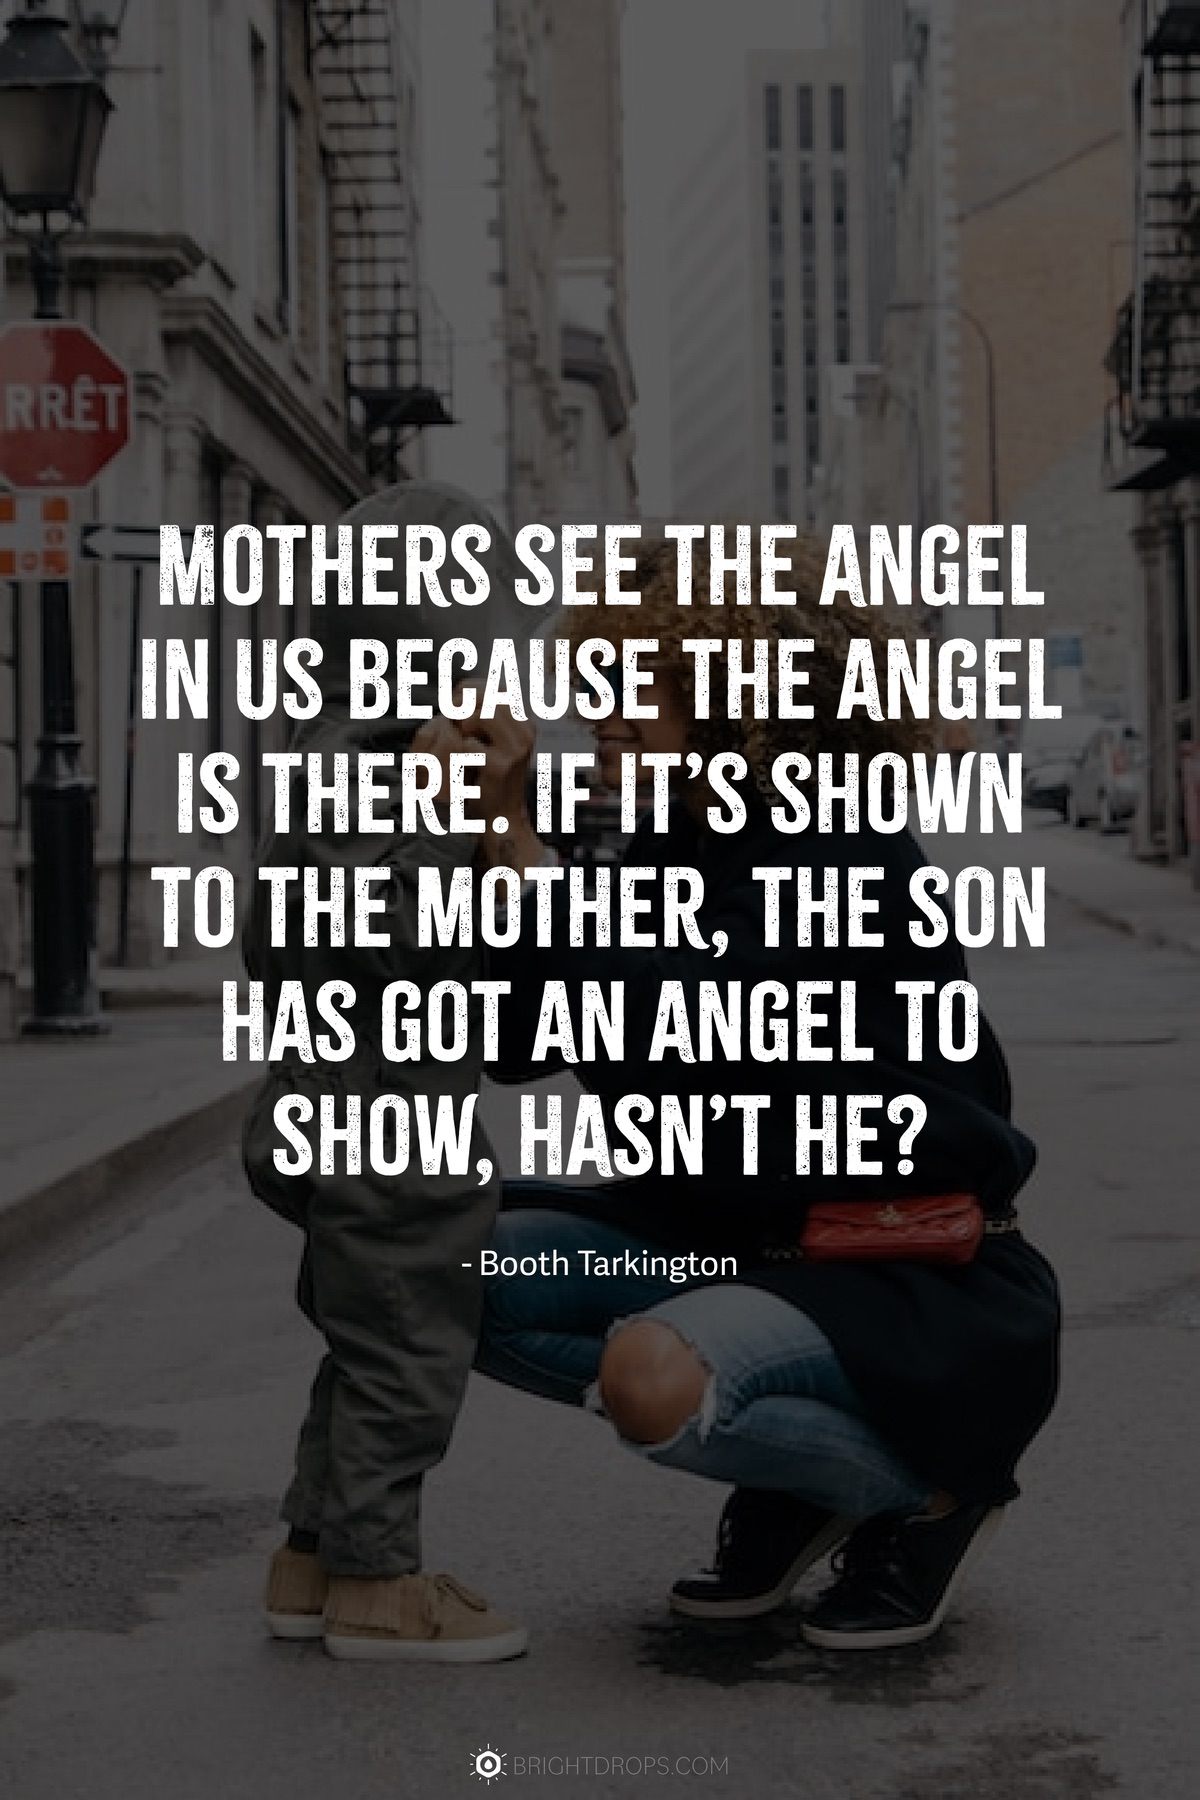 Mothers see the angel in us because the angel is there. If it’s shown to the mother, the son has got an angel to show, hasn’t he?